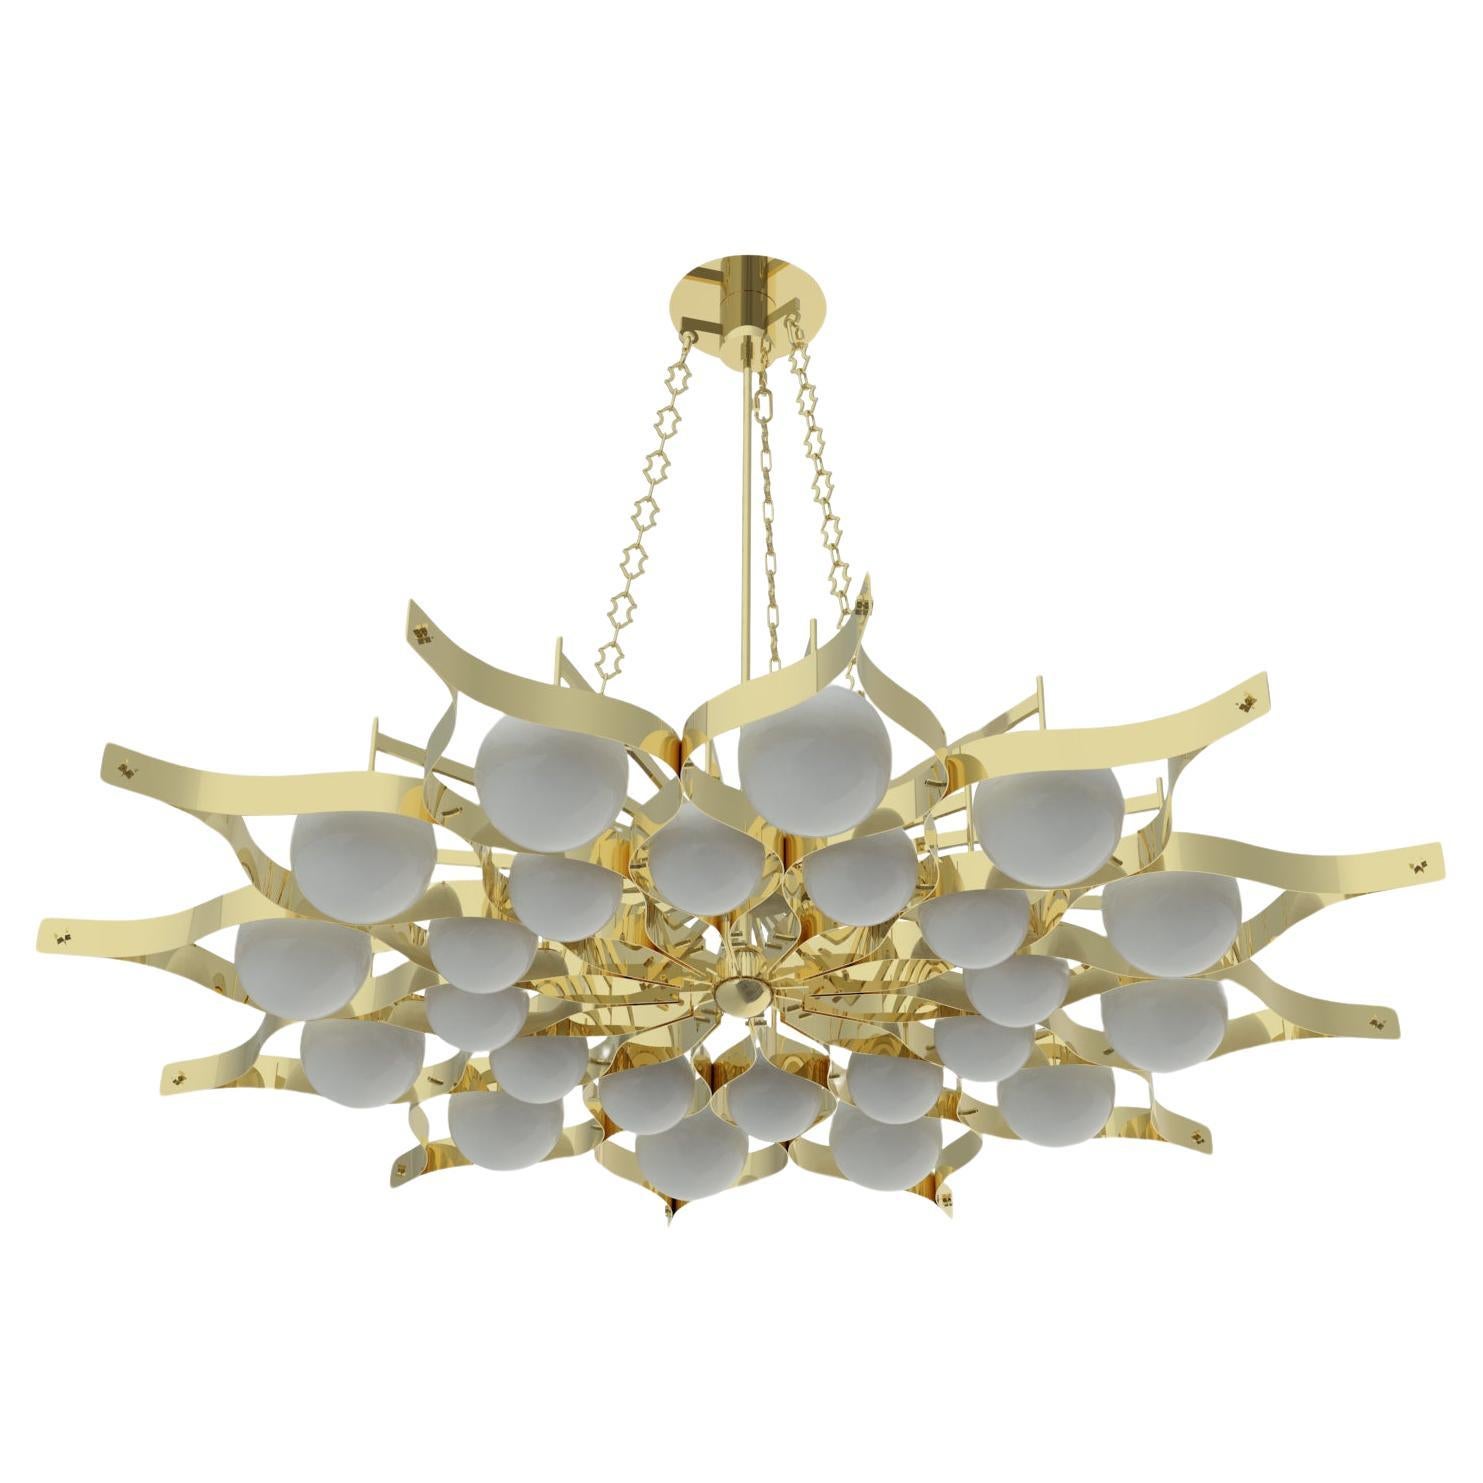 21st Century Pavone Large Pendant Lamp with chains, UL, phase cut, Gio Ponti